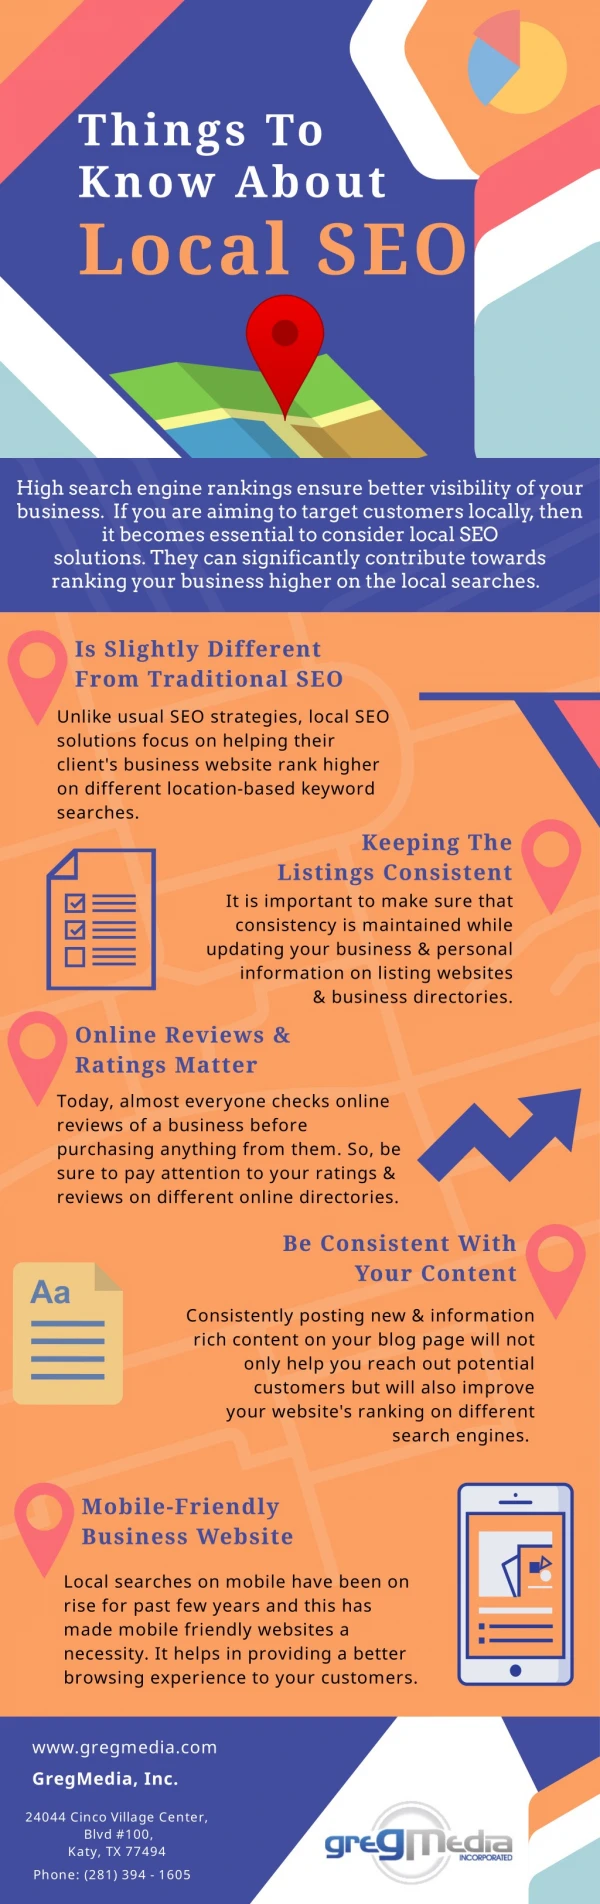 Things To Know About Local SEO